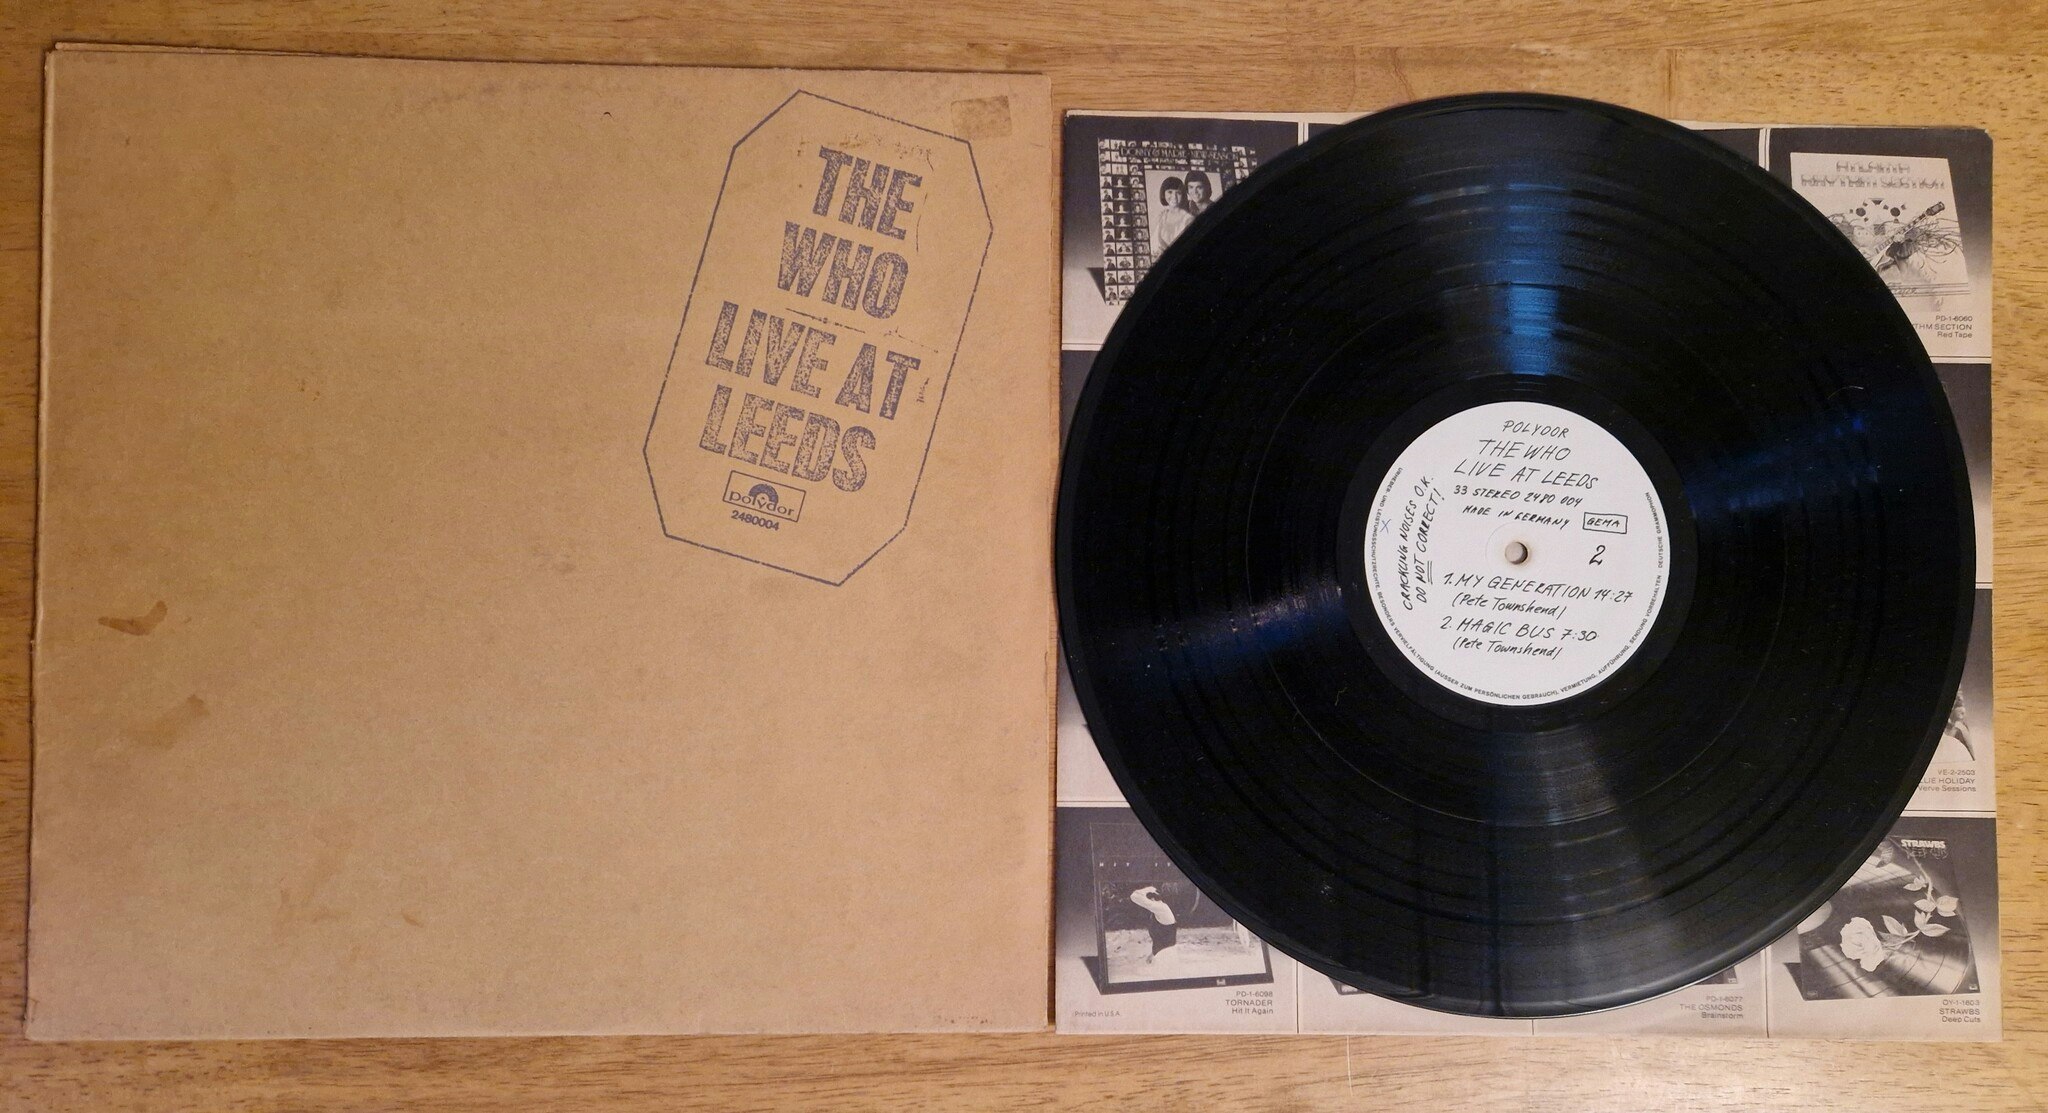 The Who, Live at Leeds. Vinyl LP